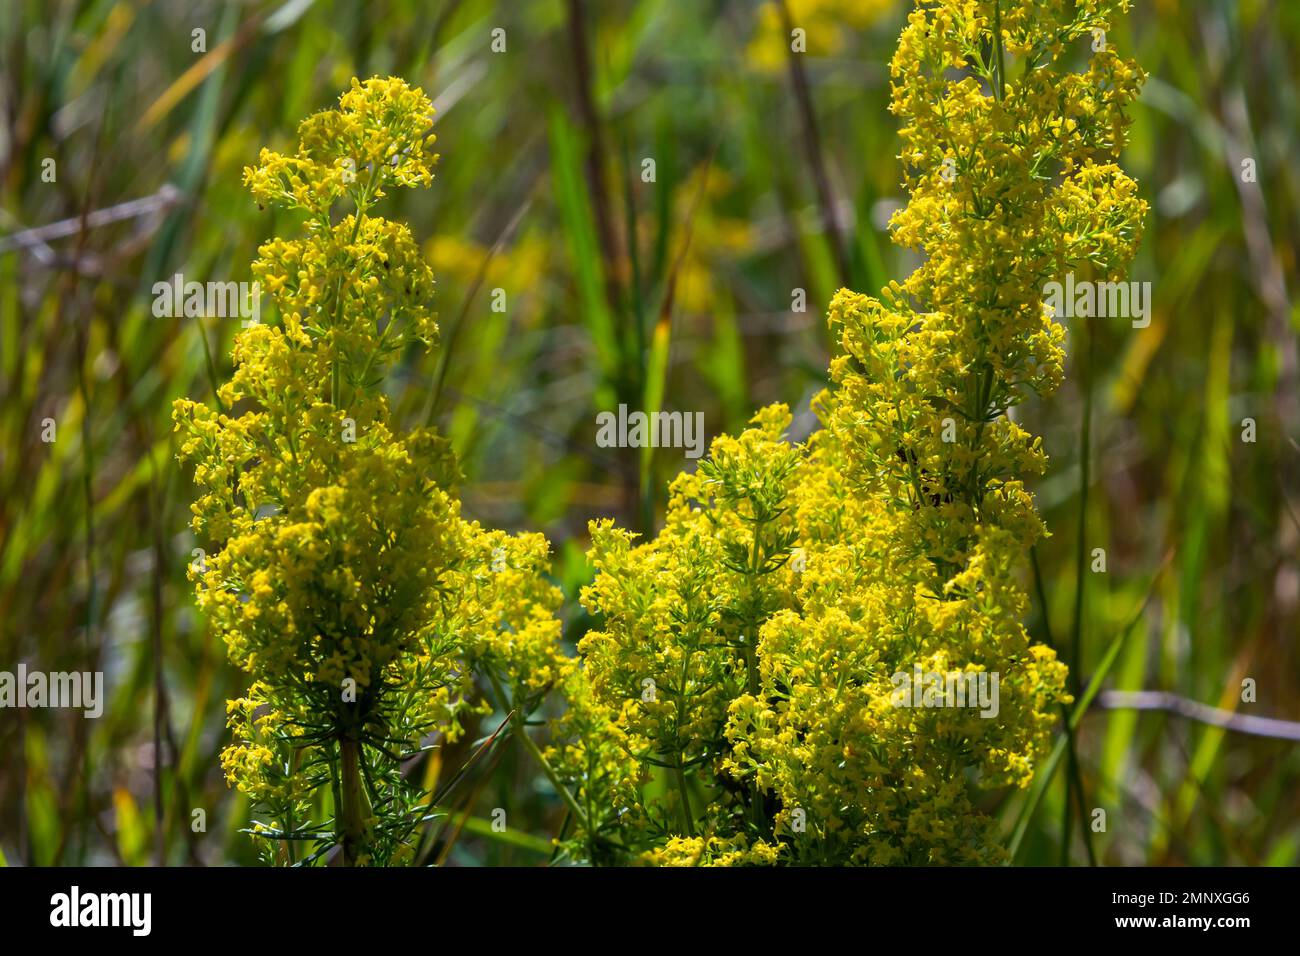 Galium verum is a herbaceous perennial plant of the family Rubiaceae. Flowering meadow, fragrant, honey plants. Stock Photo